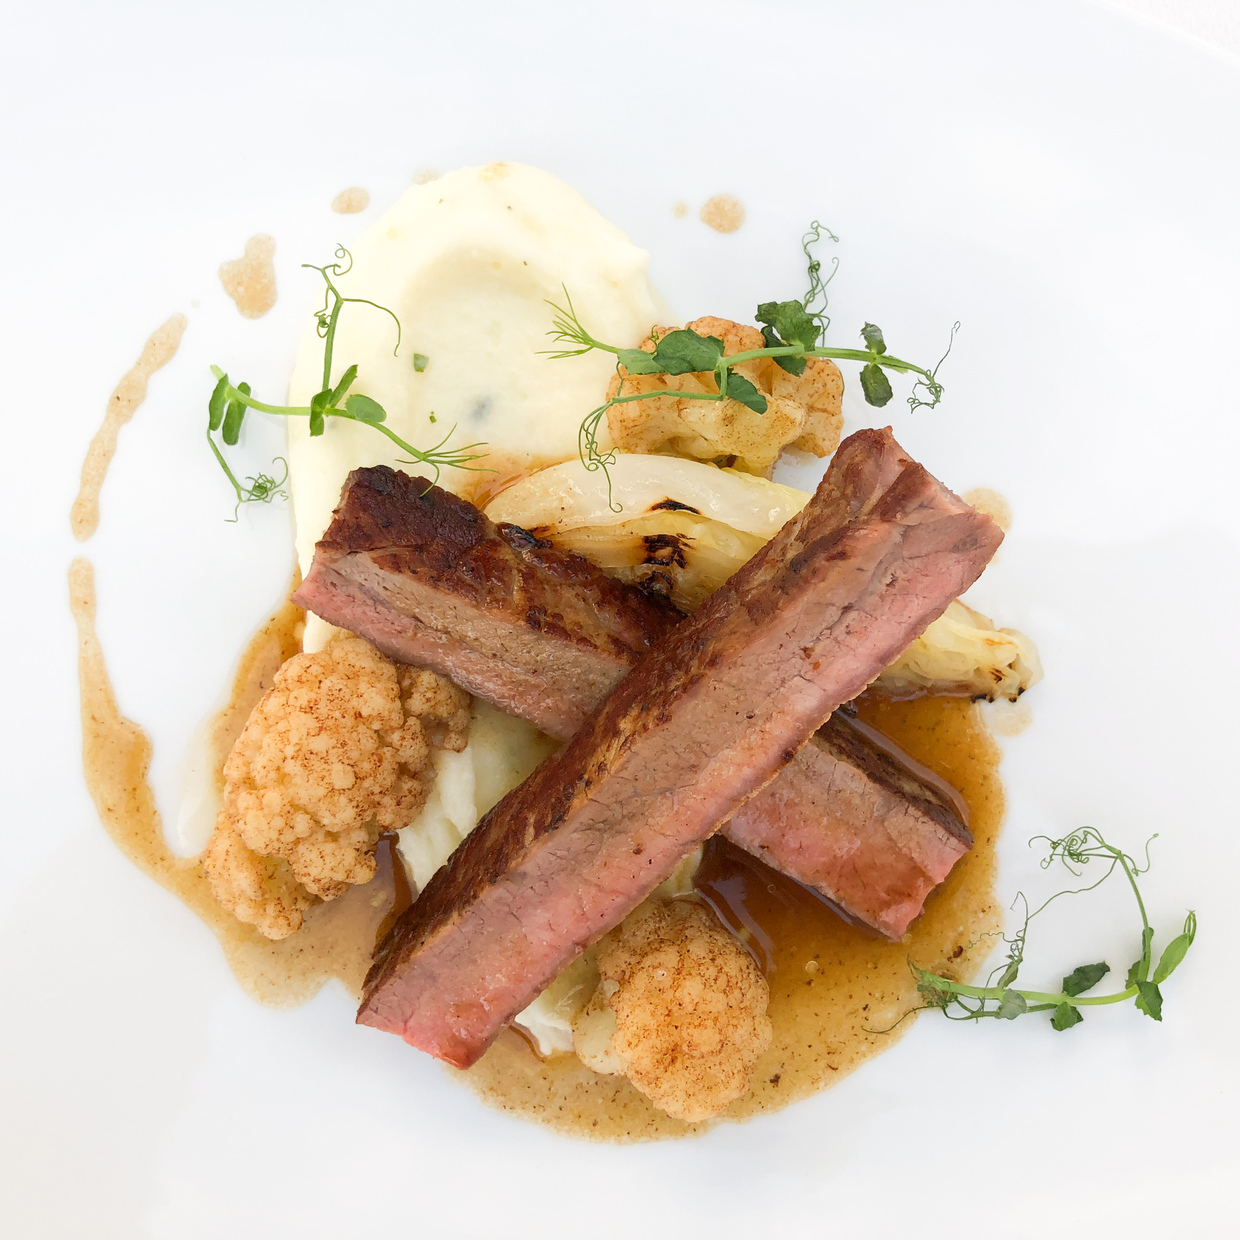 Striploin, potato purée, ‘cabbage from green egg’, cauliflower with brown butter